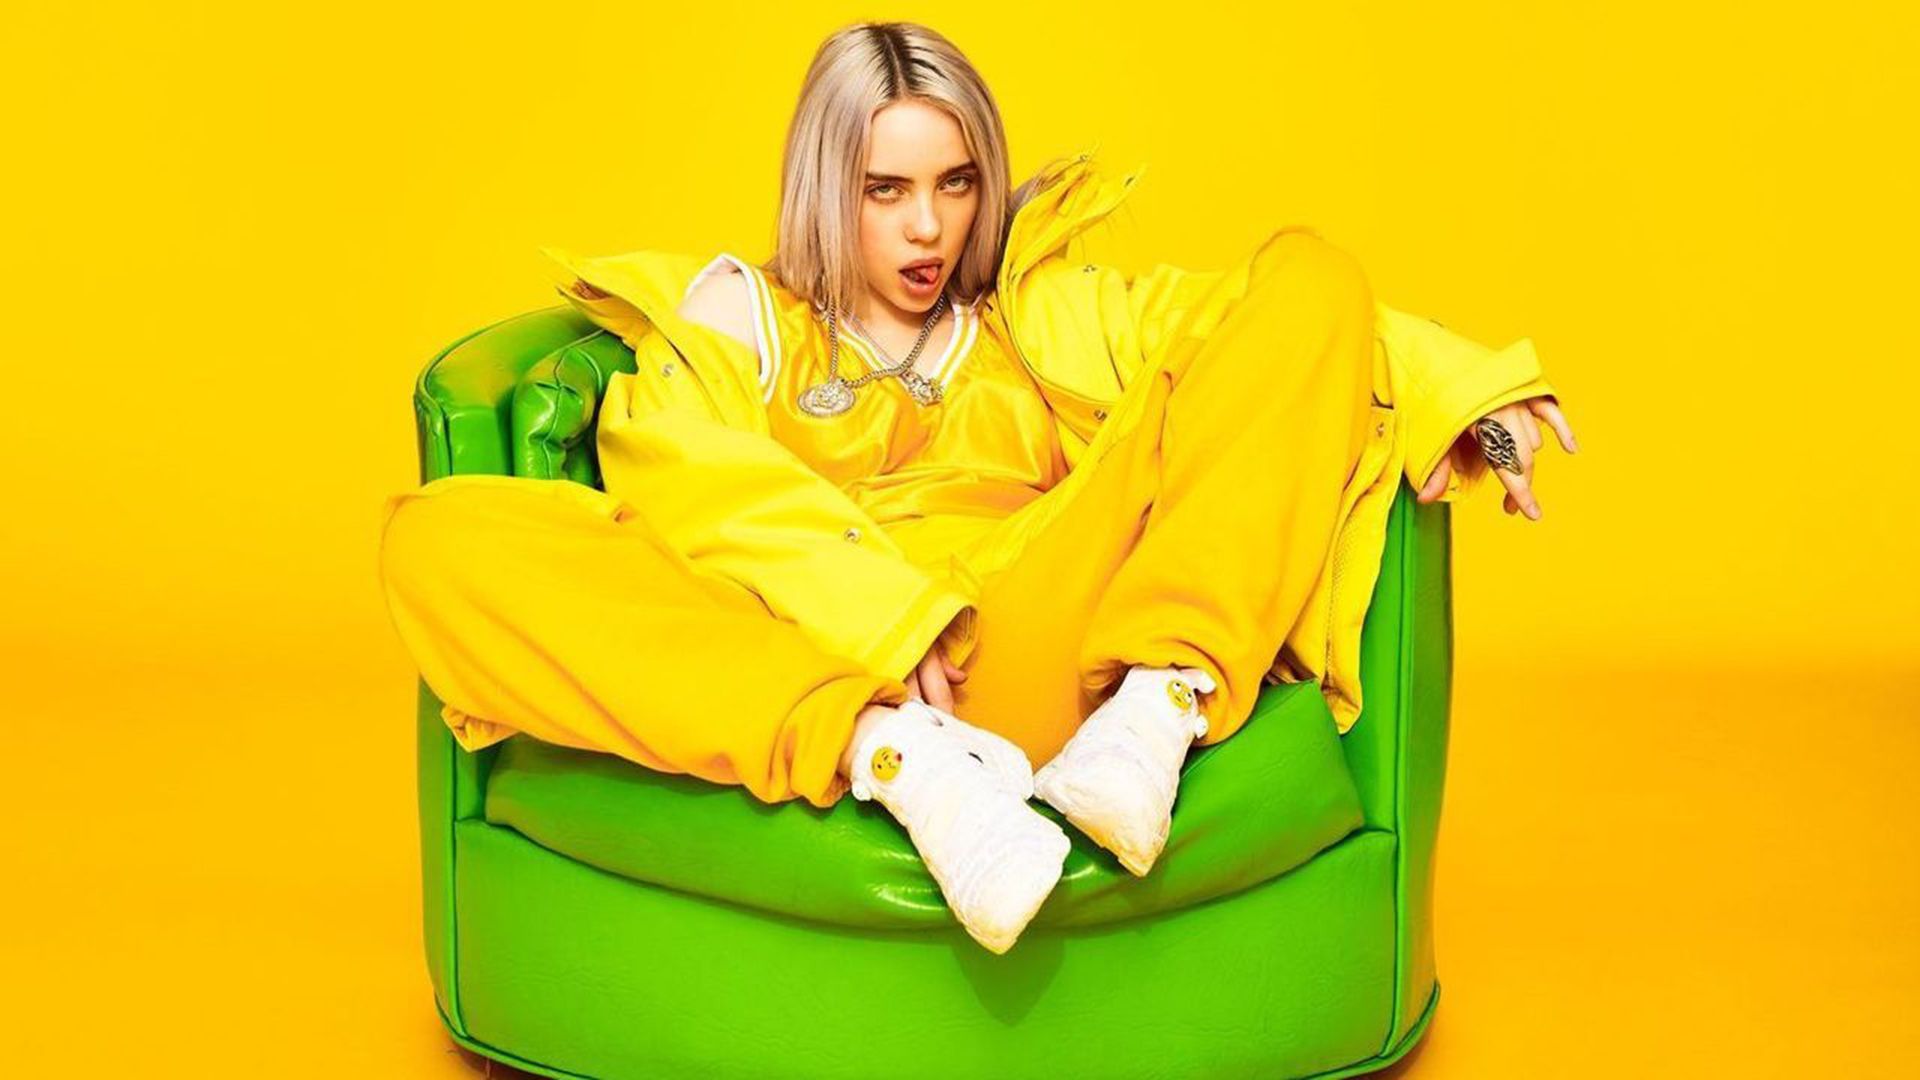 A woman in yellow sitting on top of green chair - Billie Eilish